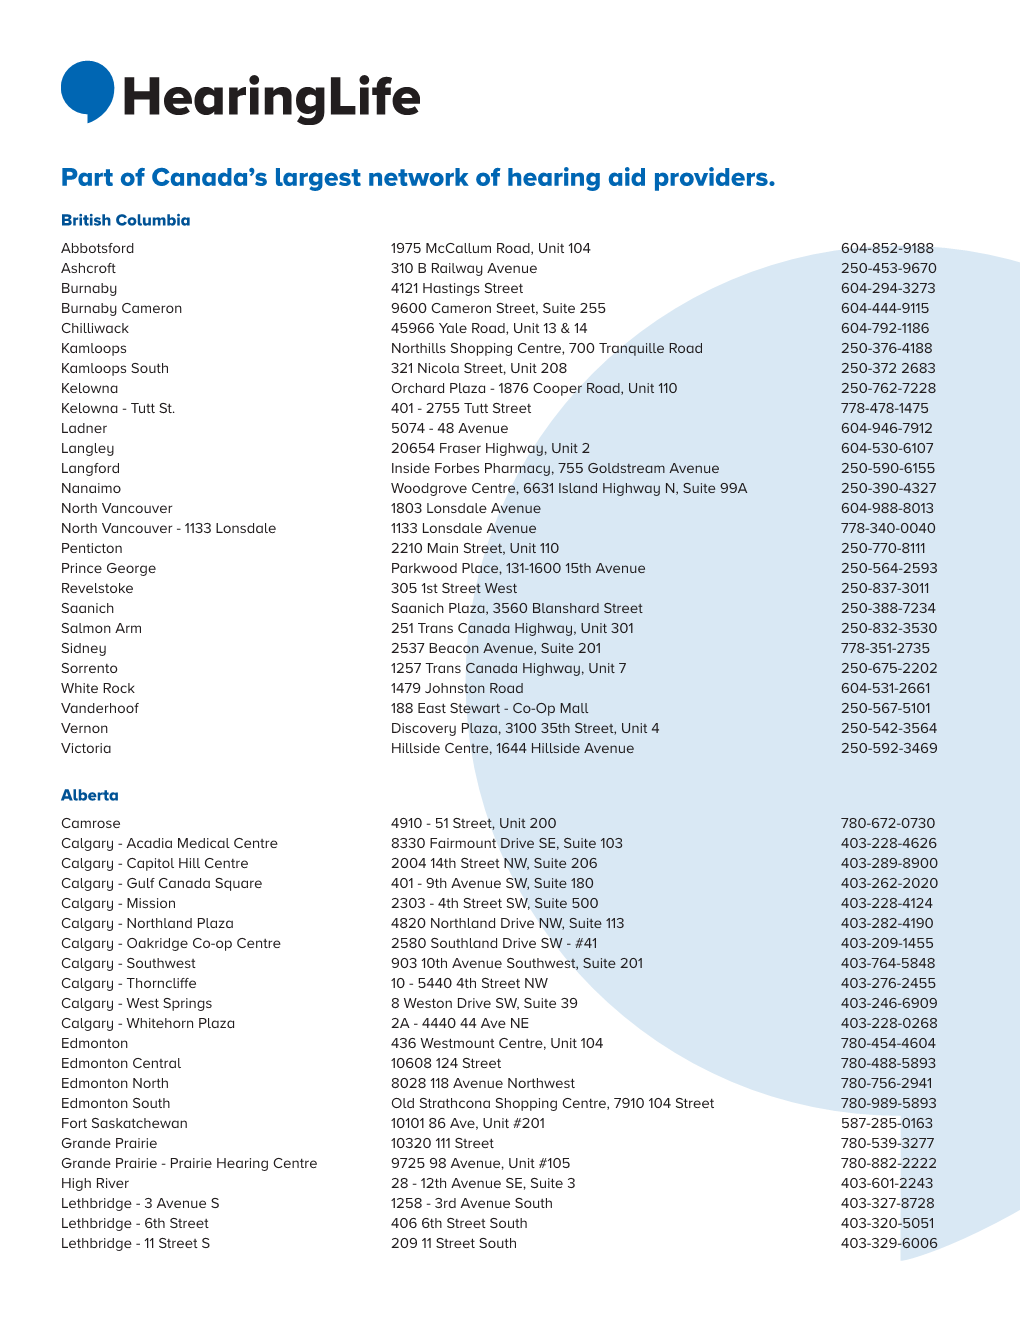 Part of Canada's Largest Network of Hearing Aid Providers